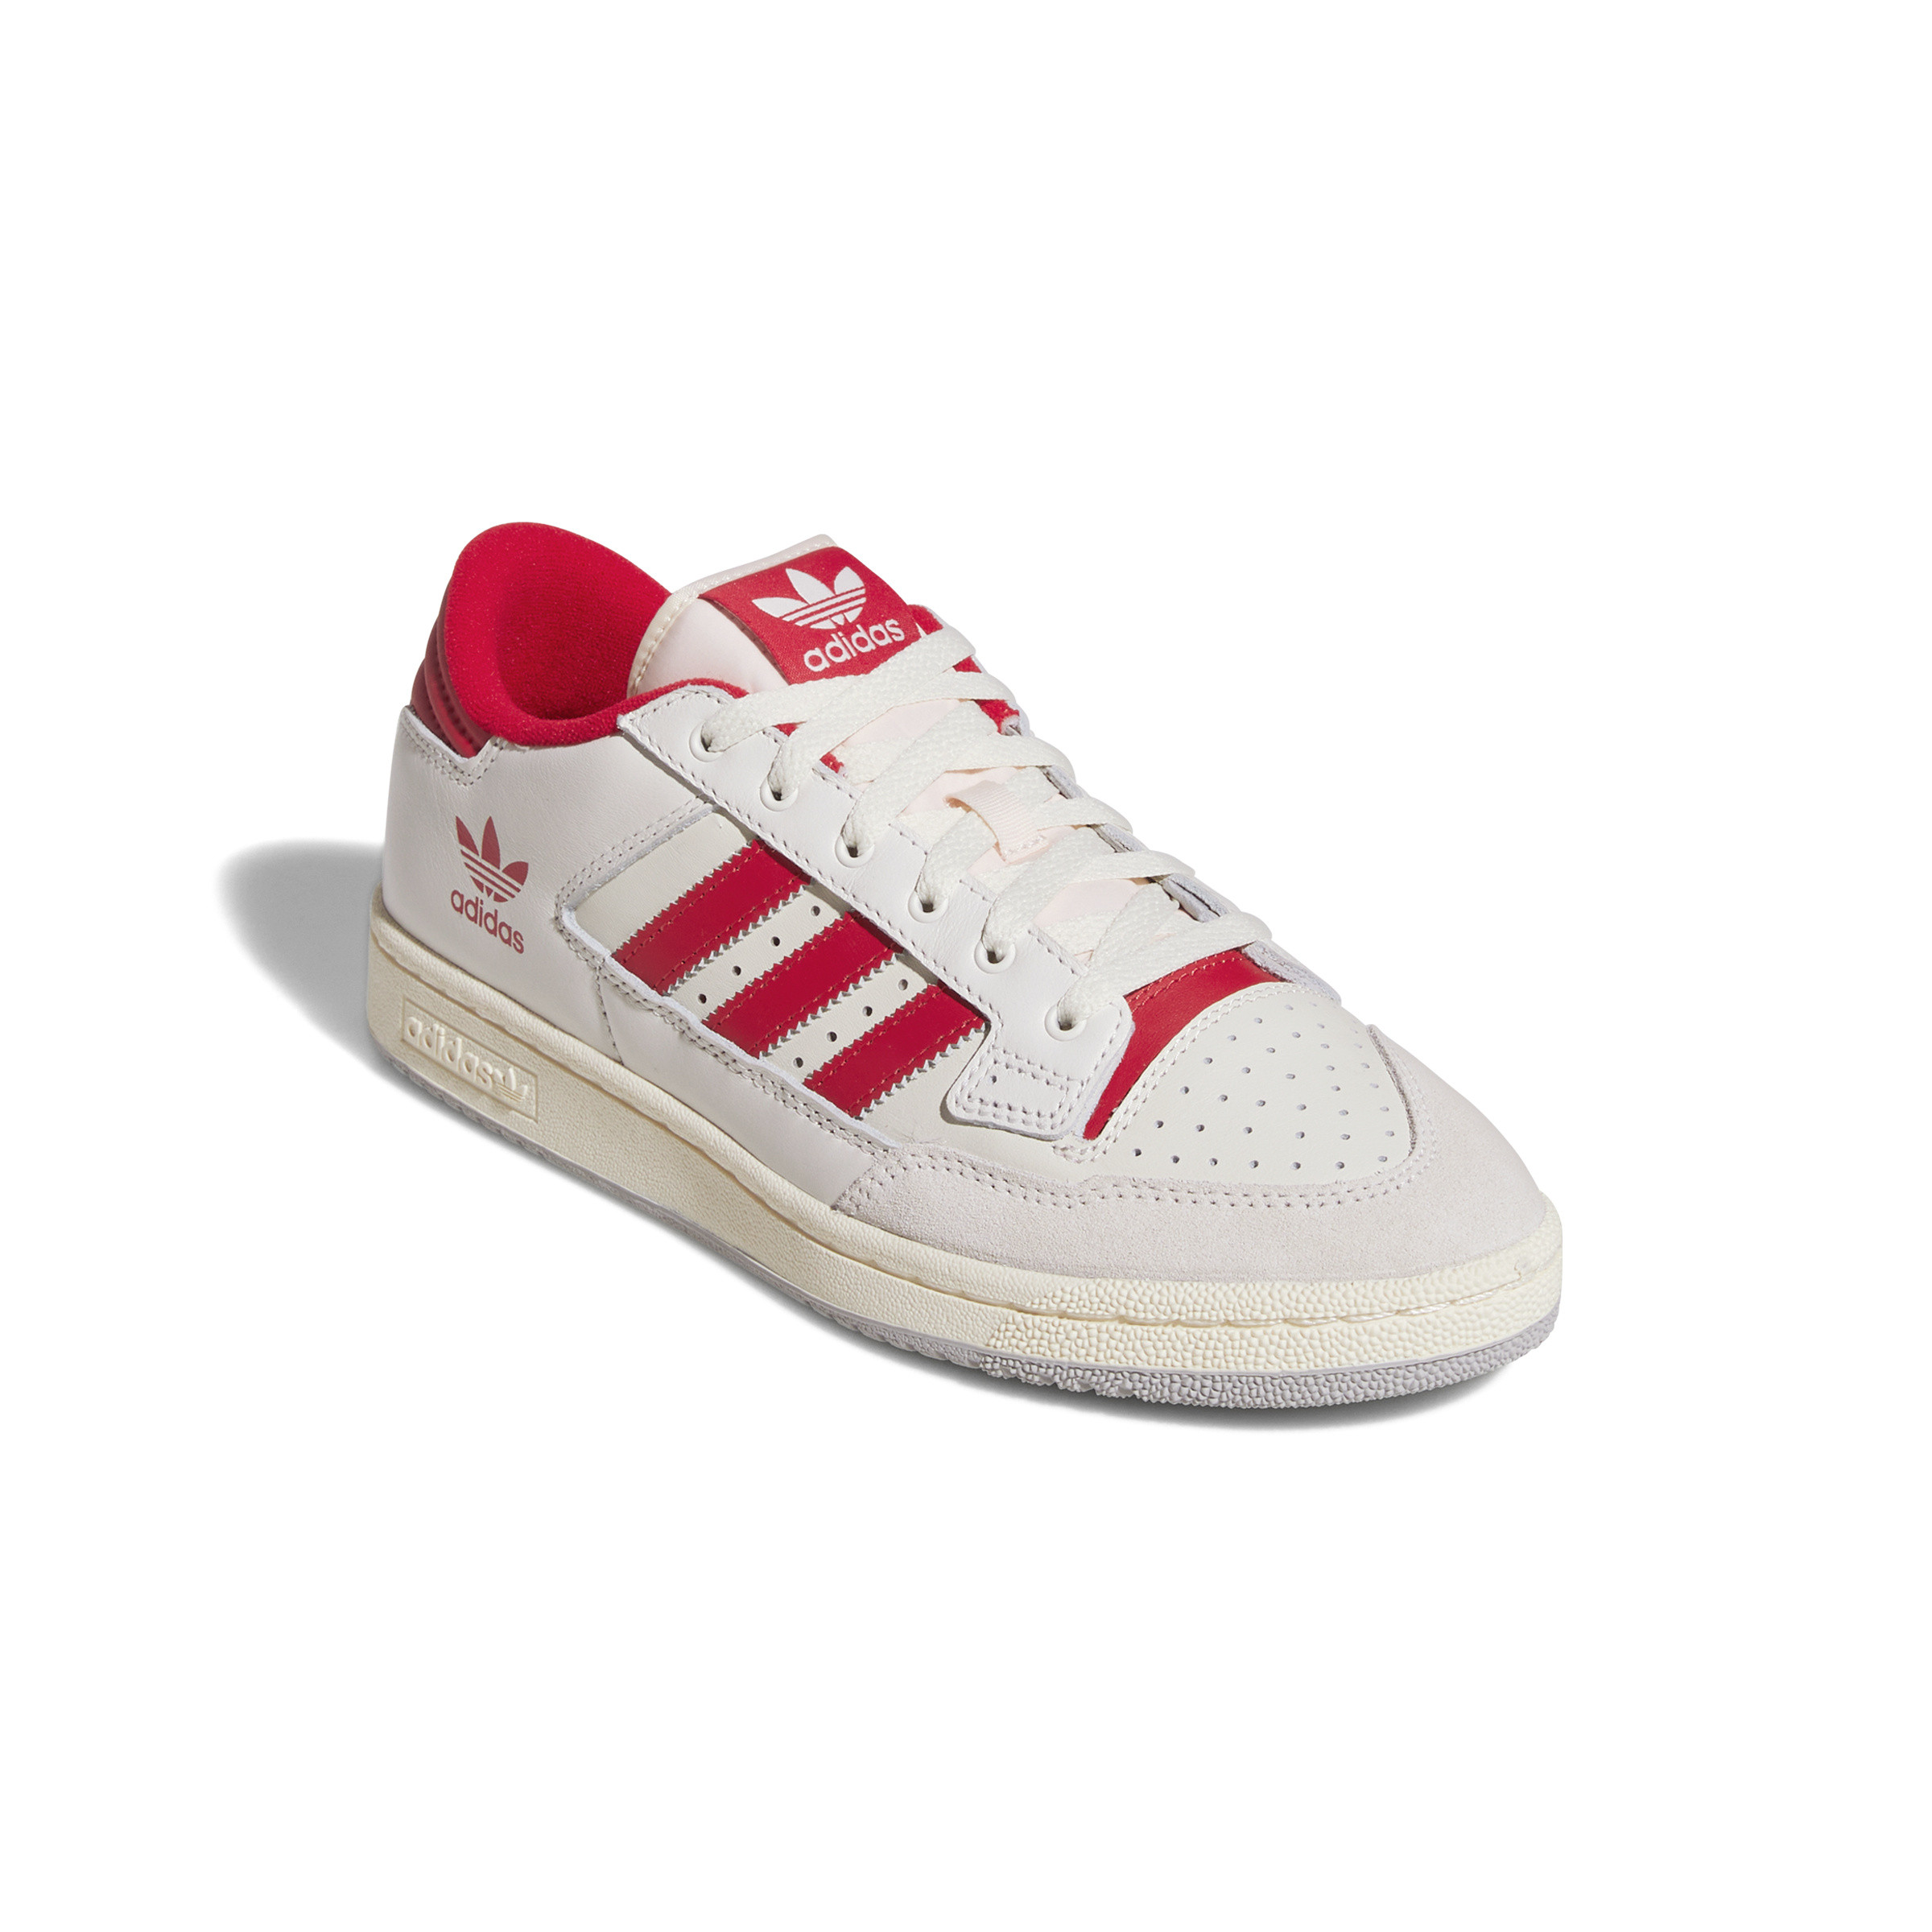 Adidas - Centennial 85 low shoes, White, large image number 3